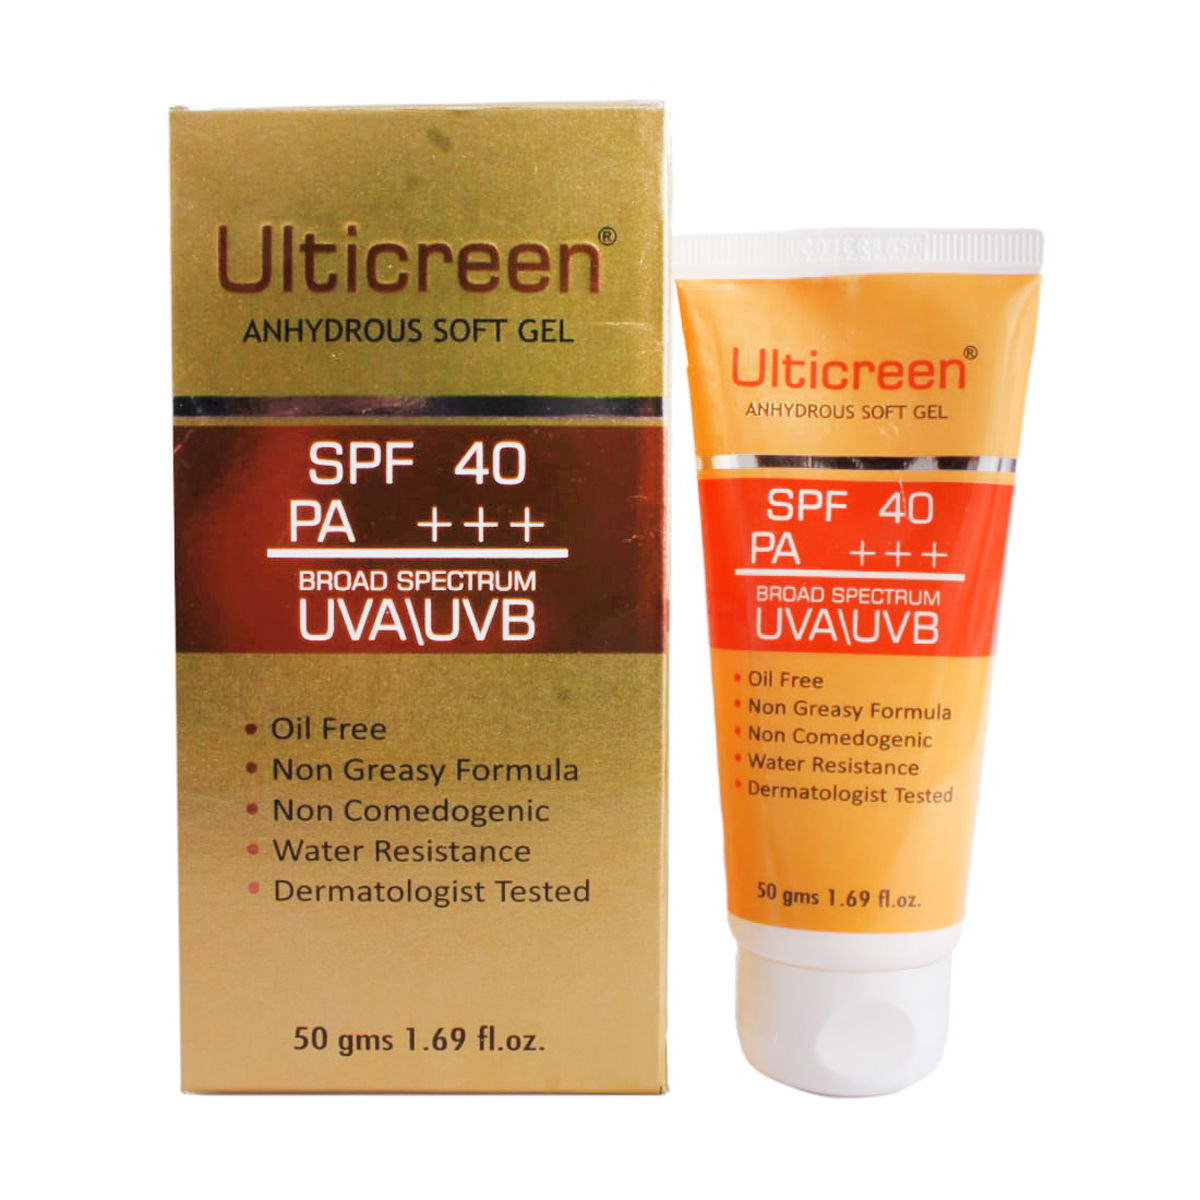 Ulticreen SPF 40 PA+++ Gel 50 gm, Pack of 1 